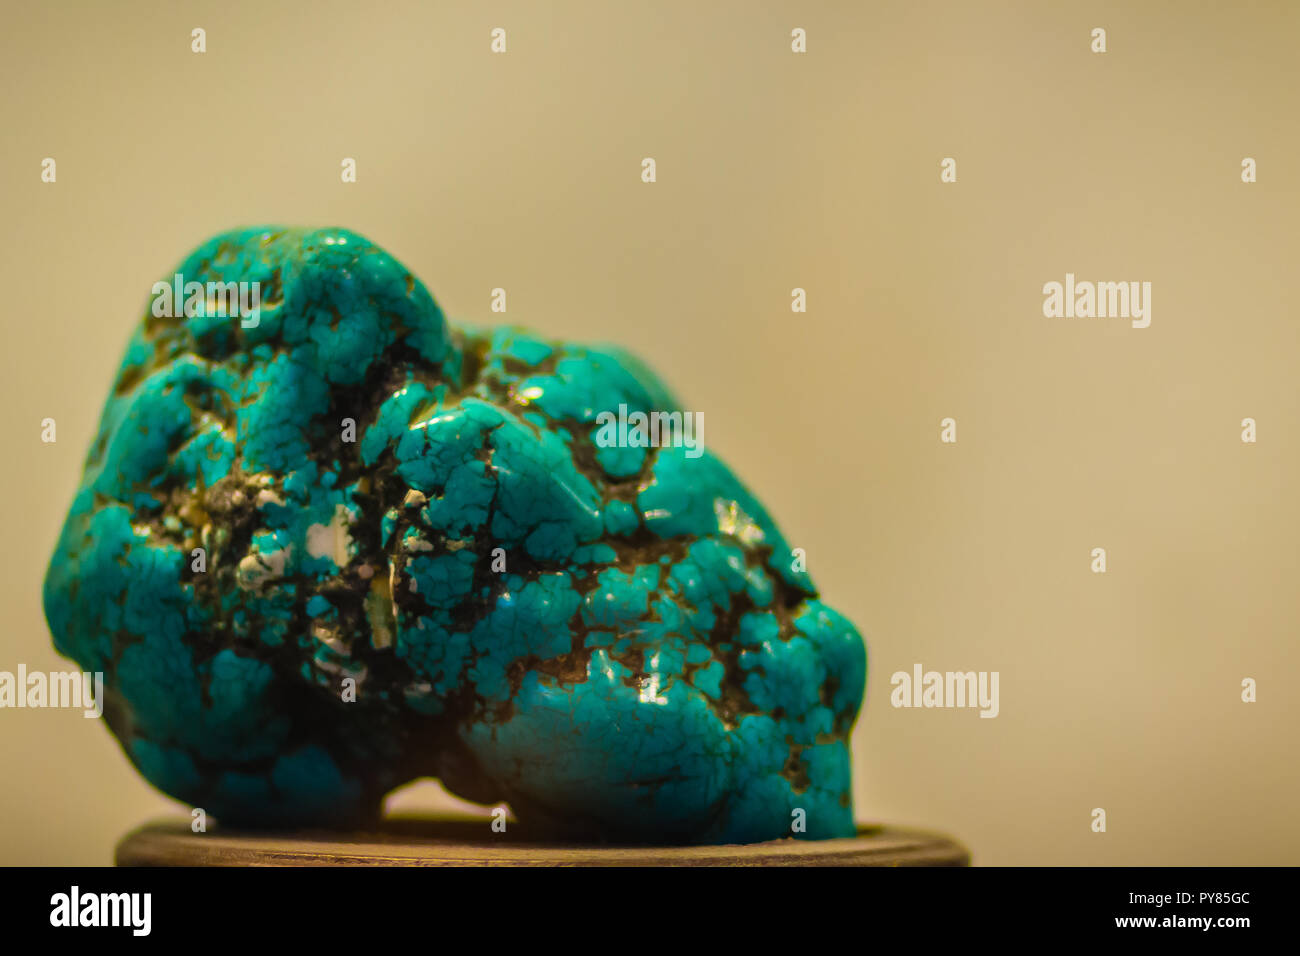 Turquoise Stone Specimen From Mining For Education Turquoise Is An